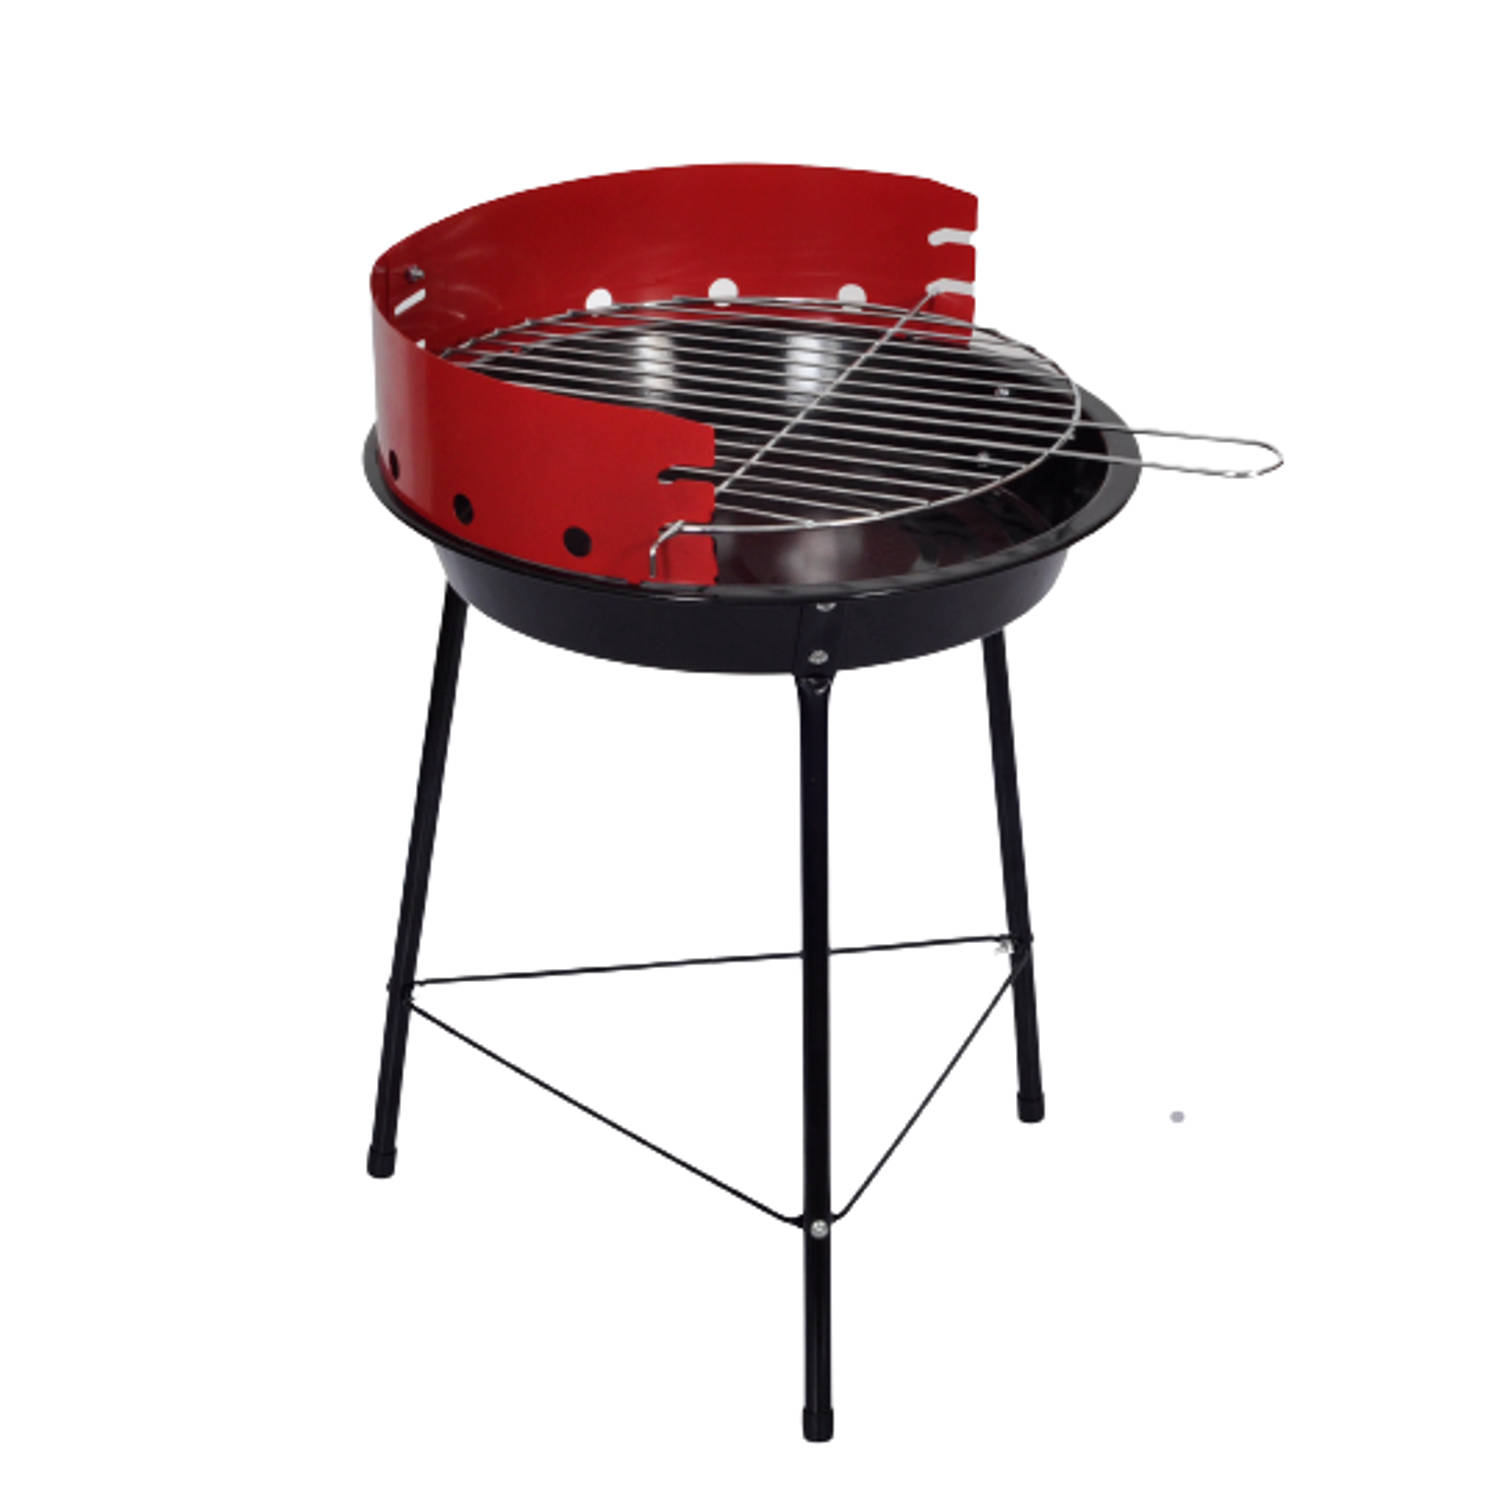 Patio 3-poot Barbecue Rond | Blokker